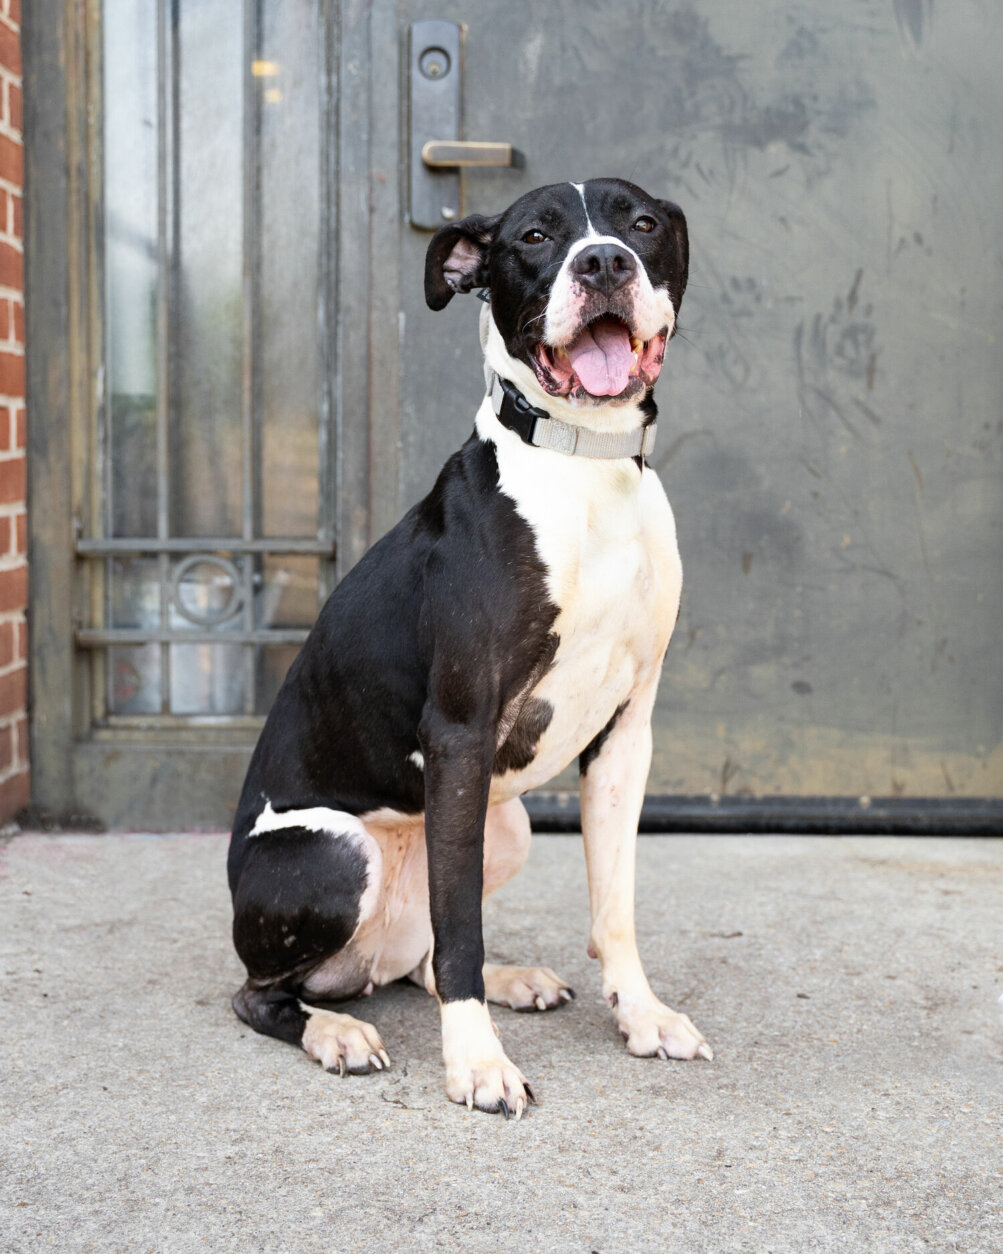 <p><strong>Dutchess</strong> was a bit wary of new people when she came to HRA.</p>
<p>But she worked hard with the behavior and training team to build up her confidence, and she is now thriving in her new home.</p>
